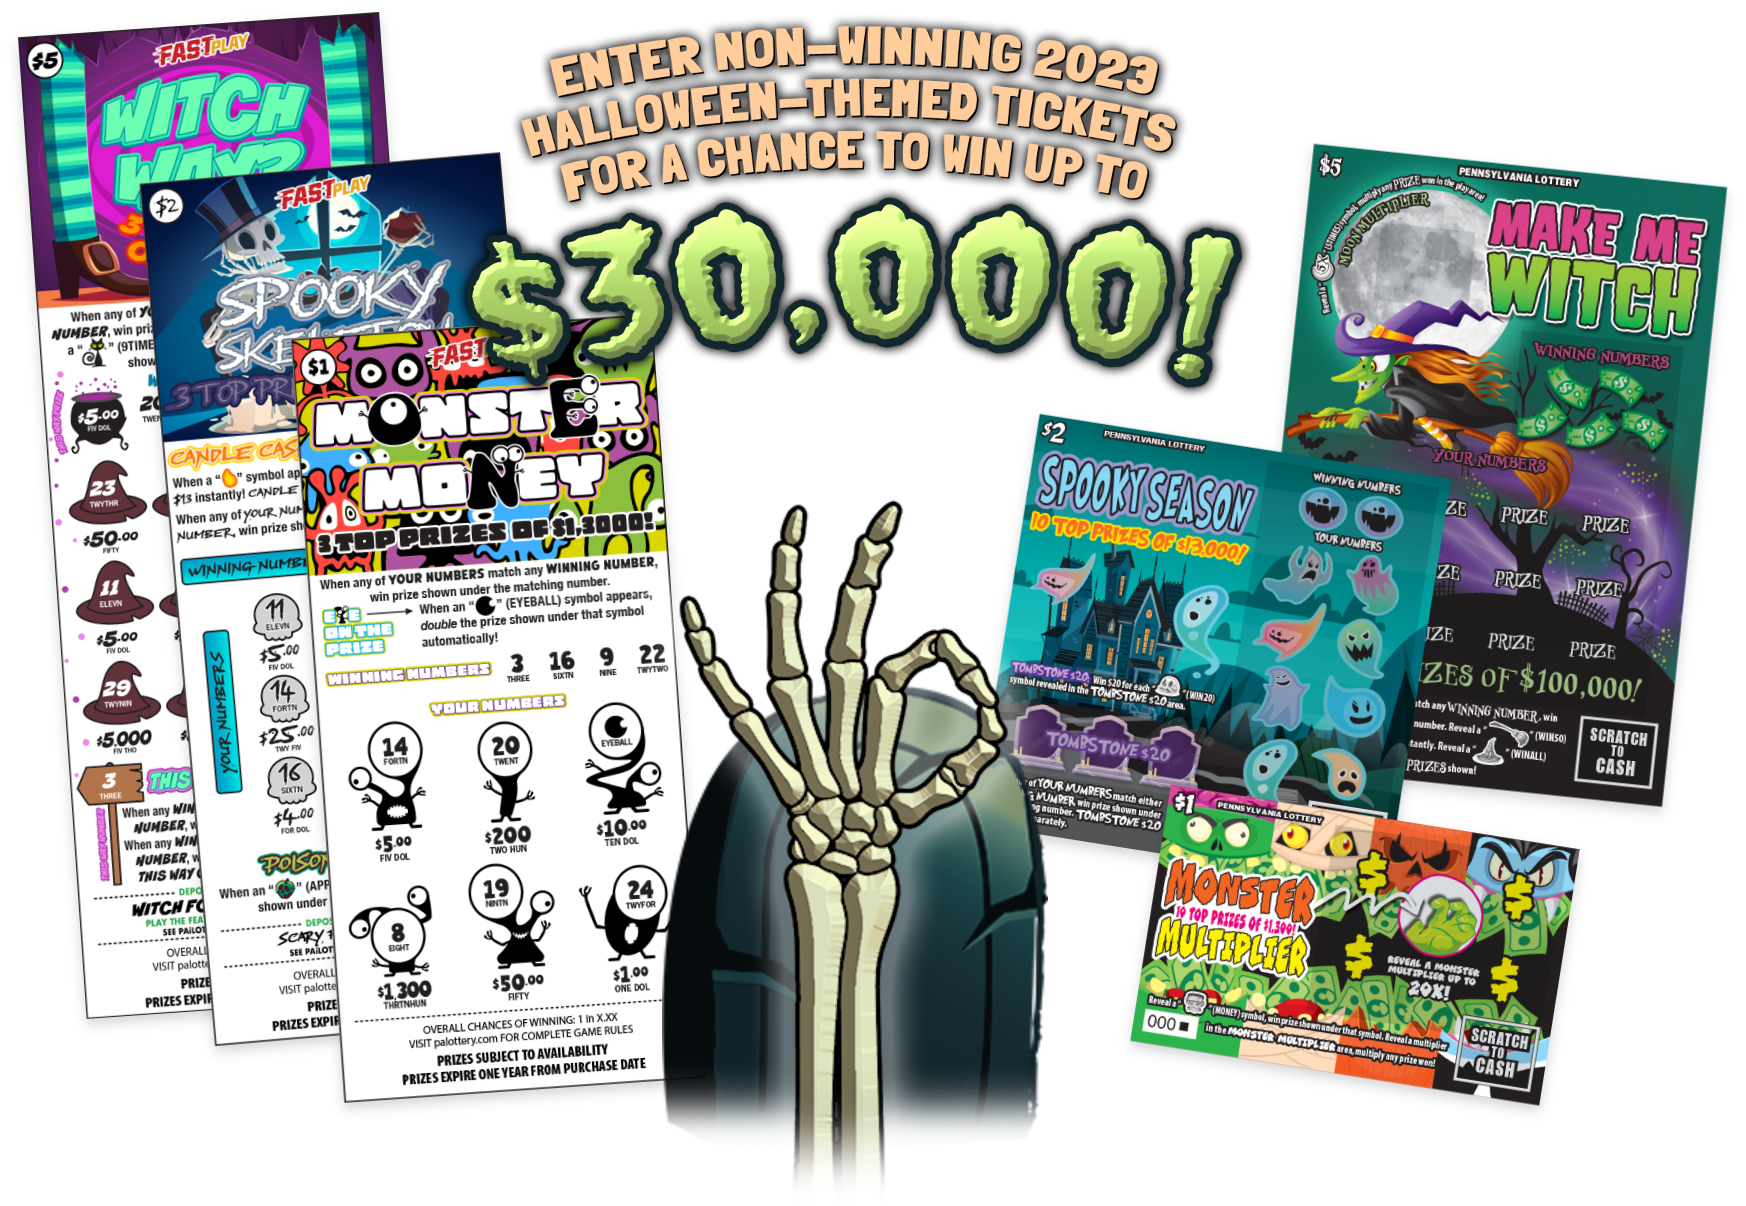 Enter non-winning 2023 HALLOWEEN-THEMED Tickets for a chance to win $30,000!